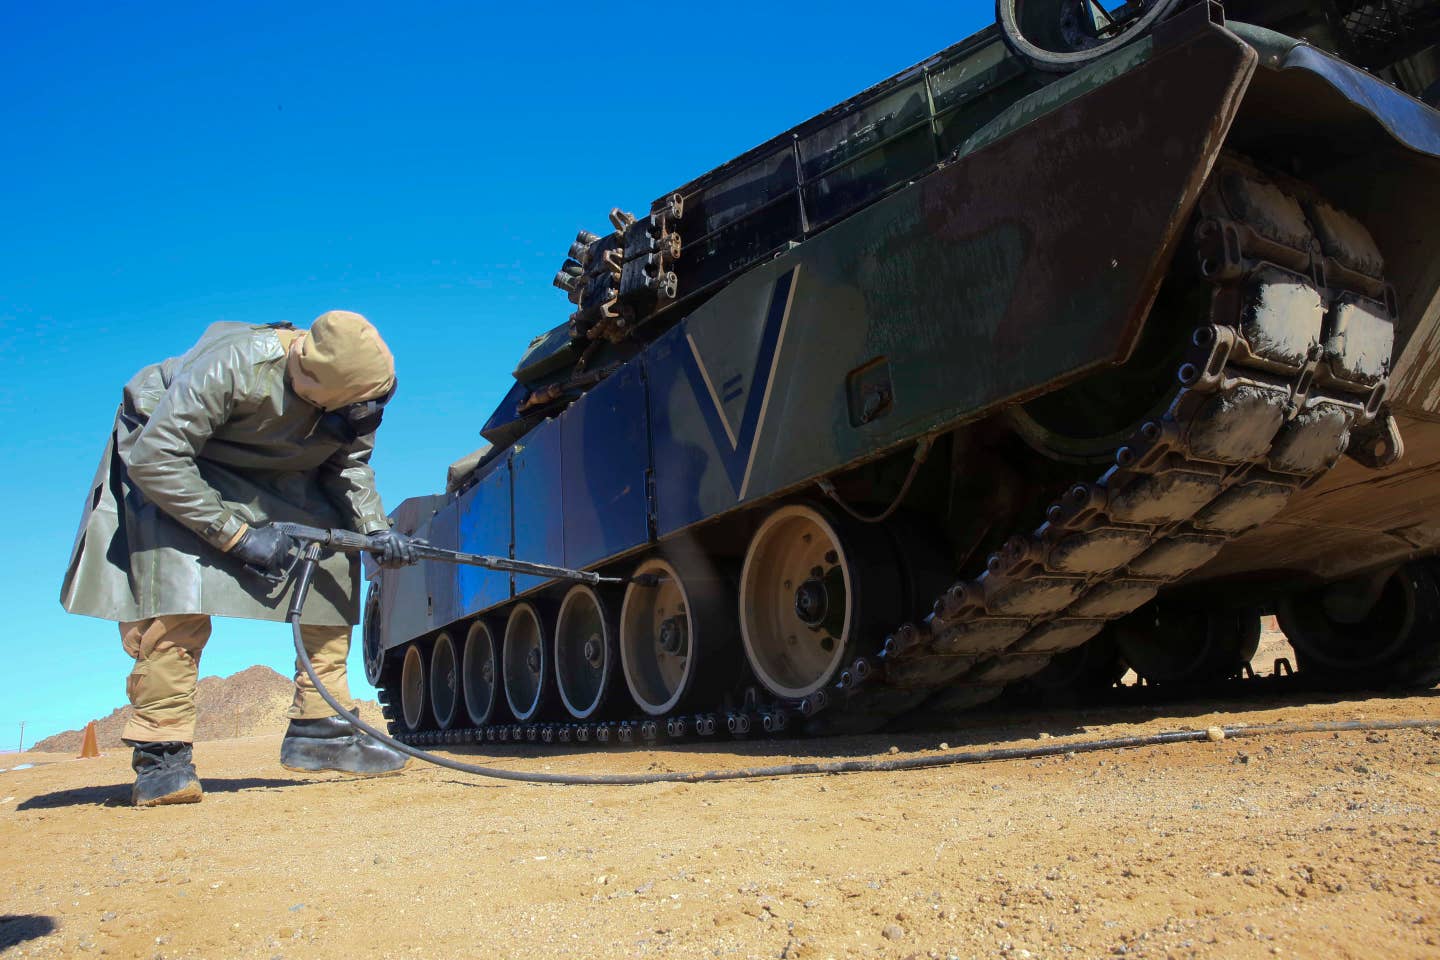 Lance Cpl. Michael Pleminski, tank maintainer, 1st Tank Battalion, decontaminates an M1A1 Abrams Main Battle Tank during 1st Tanks' operational decontamination training on Bearmat Hill, March 10, 2016. 1st Tanks held the exercise to sharpen its skills decontaminating tanks, tactical vehicles, and personnel who are exposed to Chemical, Biological, Radiological and Nuclear contaminants. (Official Marine Corps photo by Cpl. Julio McGraw)